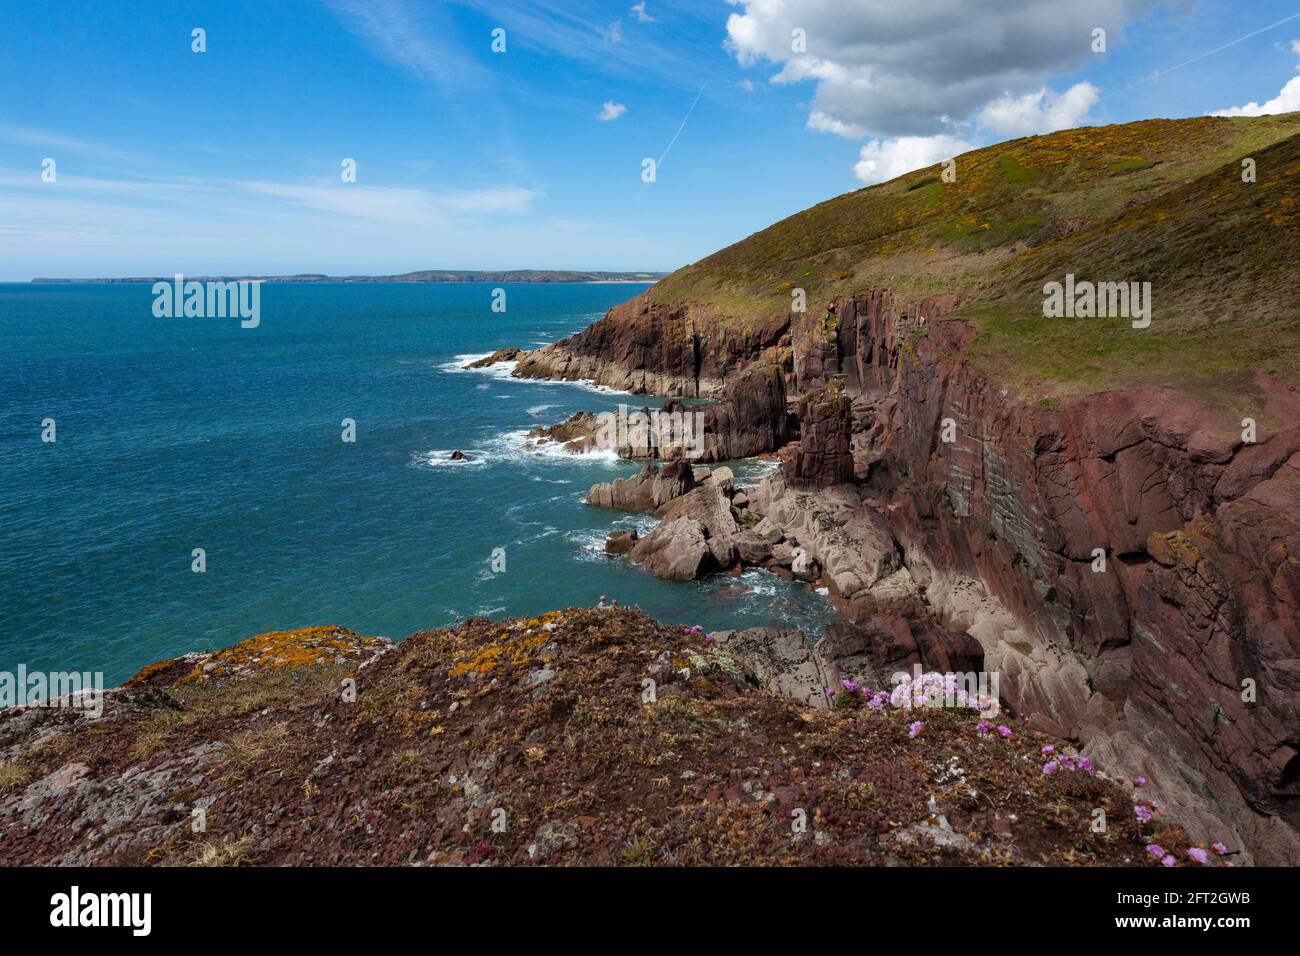 View of sea and cliffs on Pembrokeshire Coastal Path near Tenby and Manorbier, Wales Stock Photo